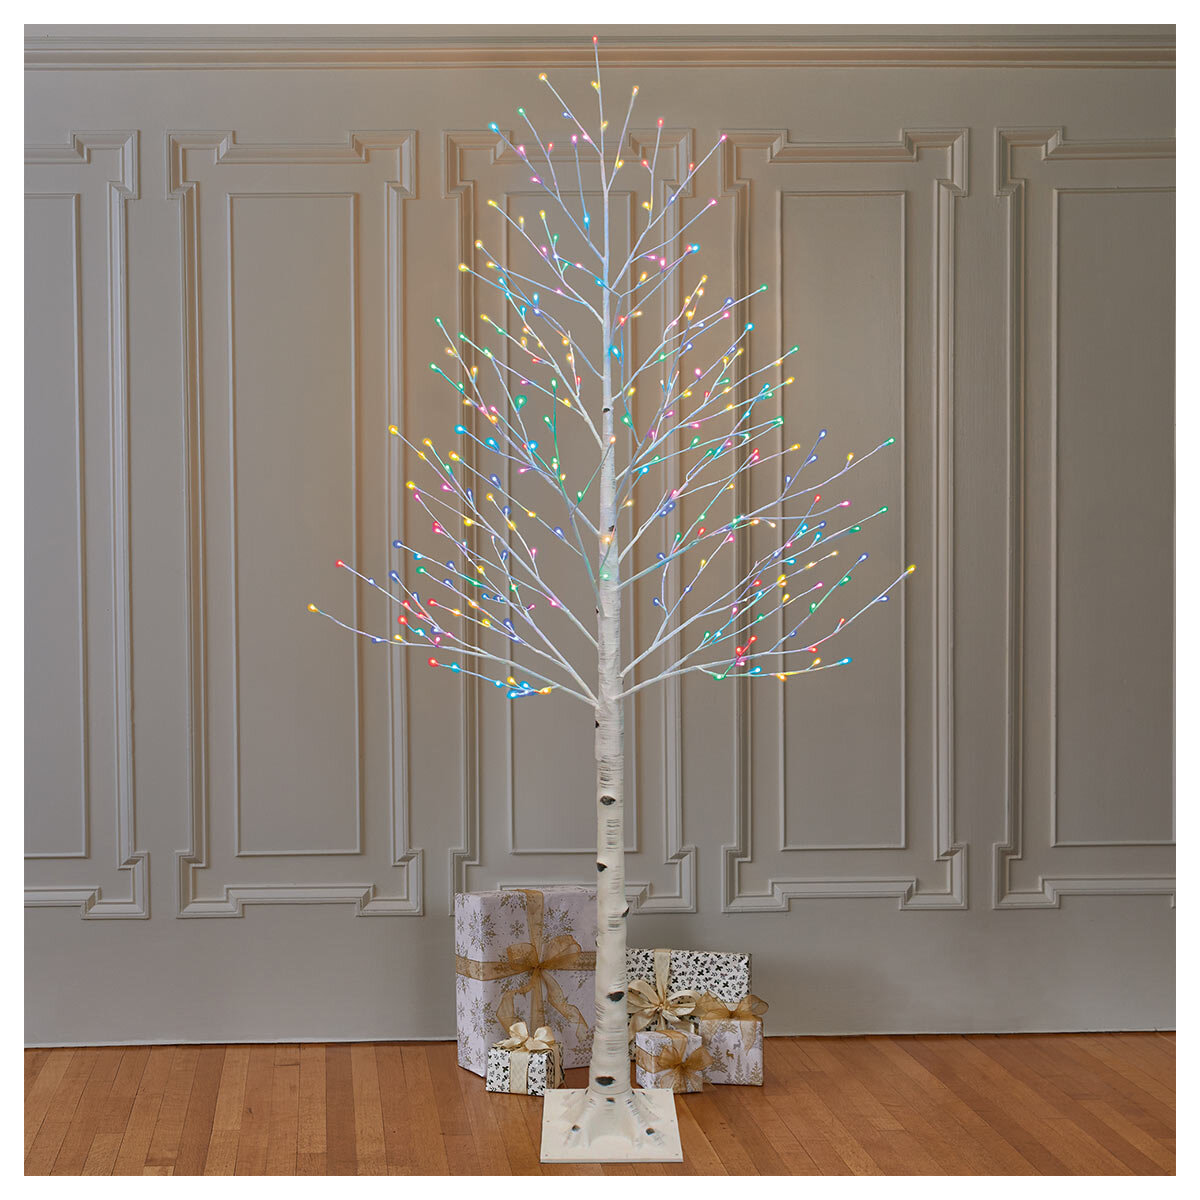 Buy Colour Select LED Birch Tree Lifestyle3 Image at Costco.co.uk